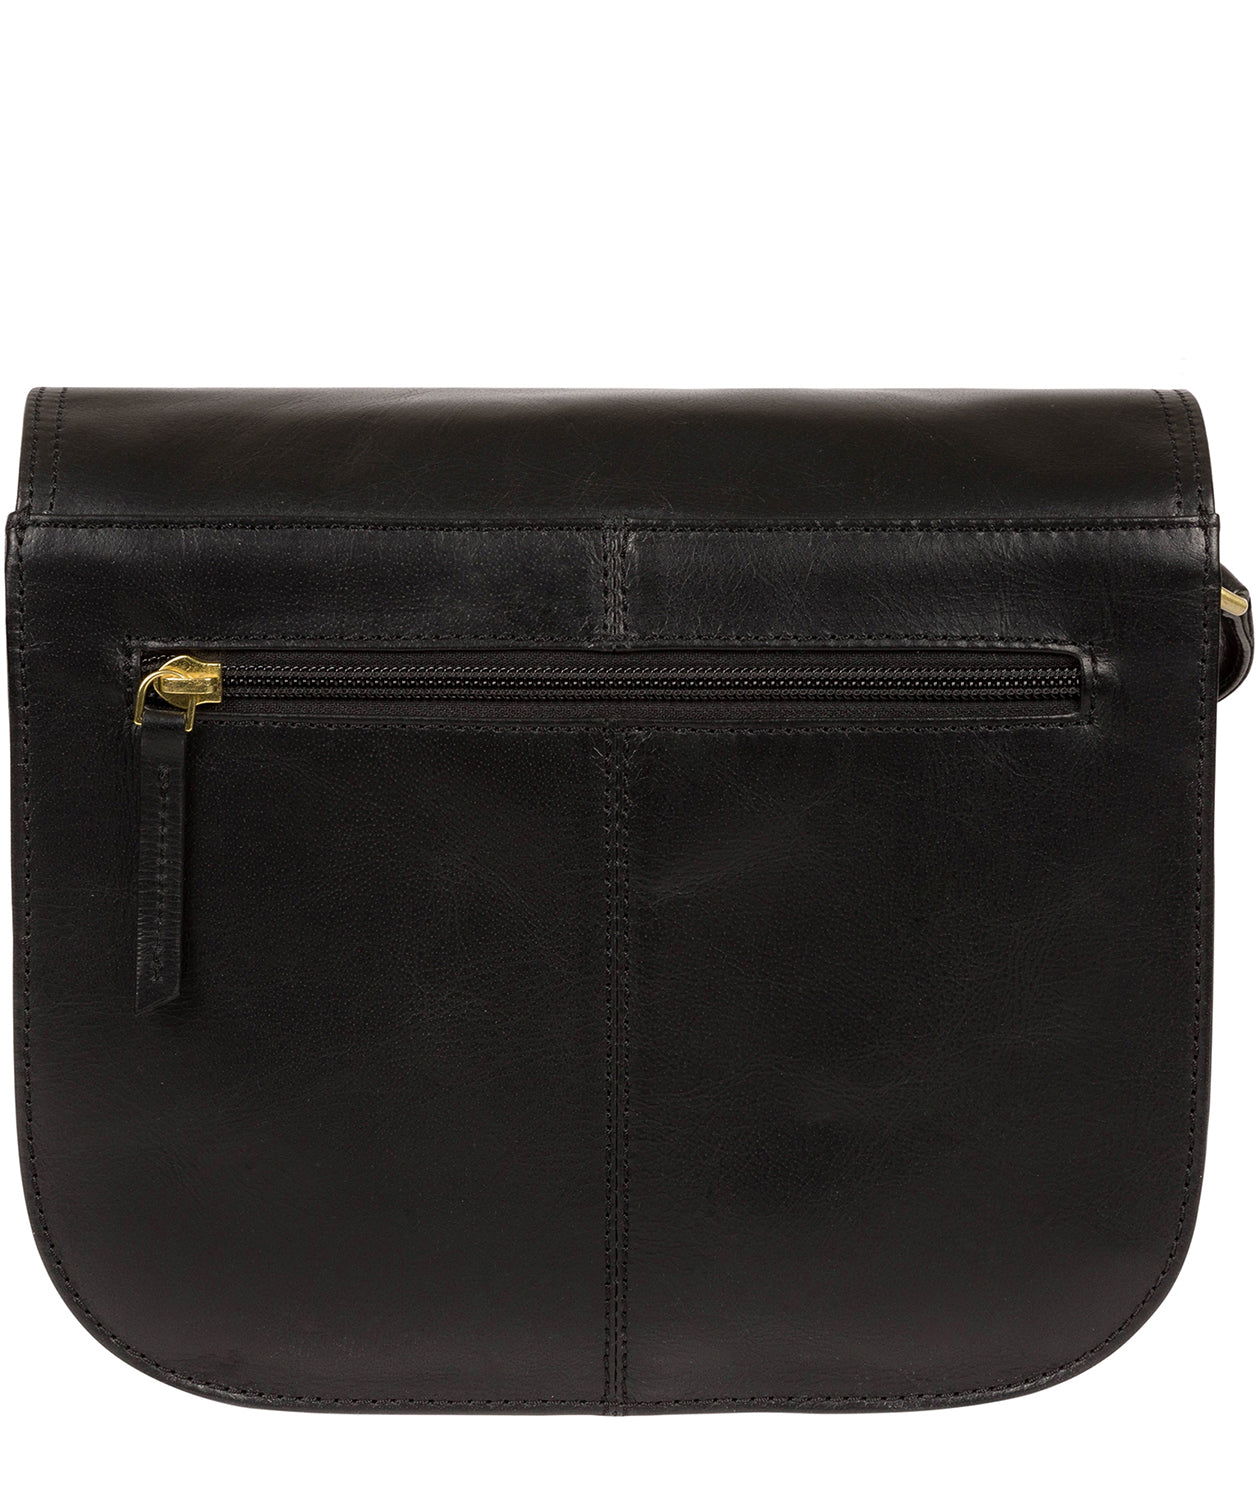 Black Leather Shoulder Bag 'Empoli' by Pure Luxuries – Pure Luxuries London